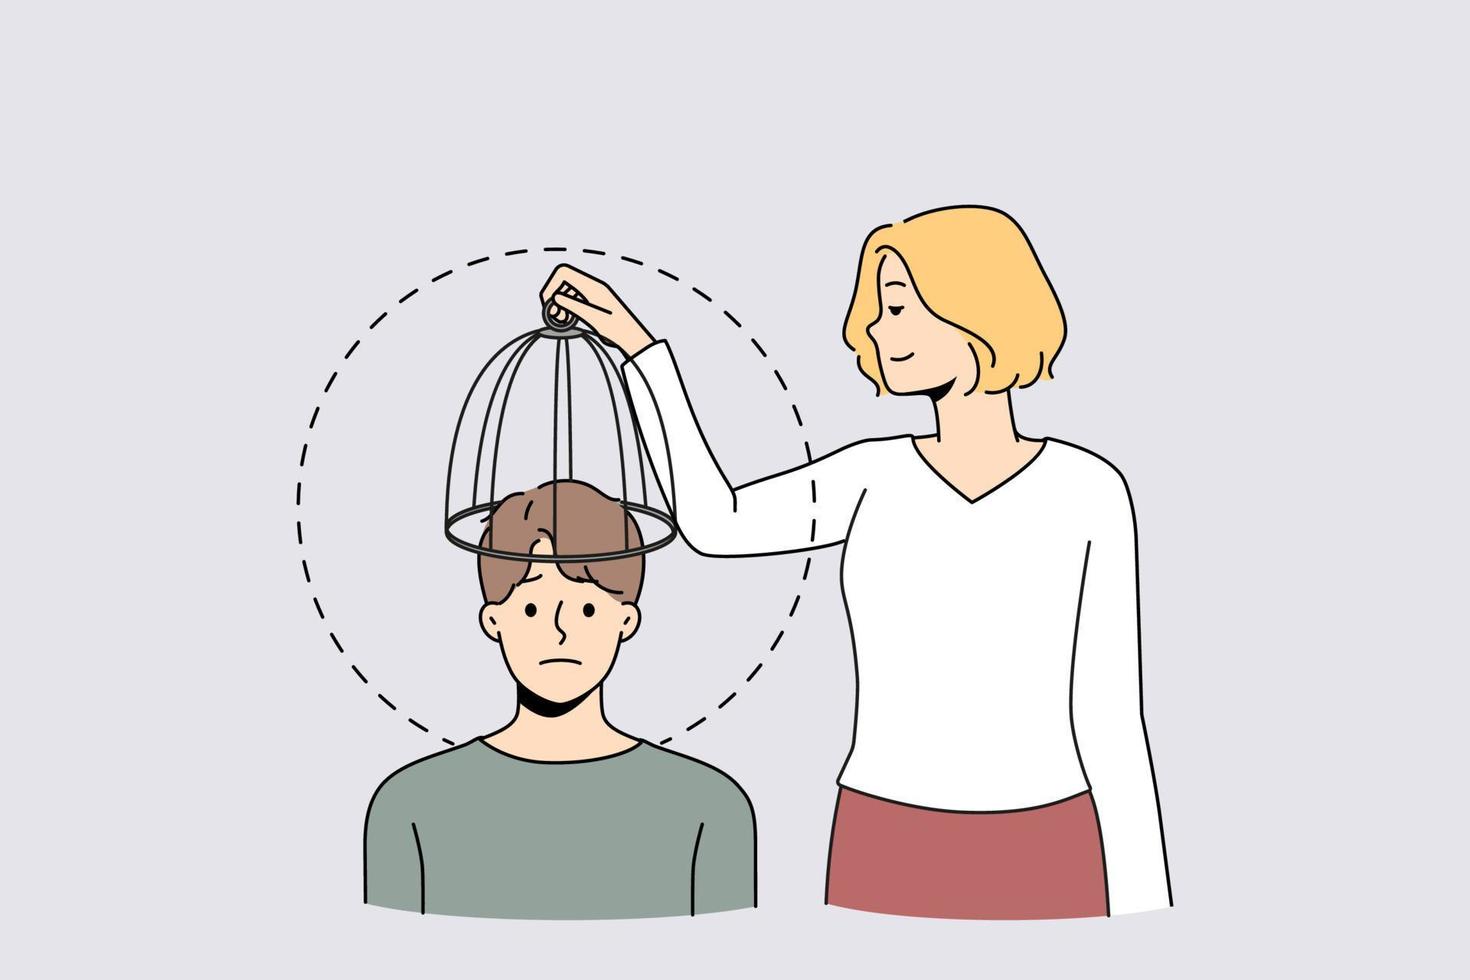 Woman take cage from man head free his mind to new ideas and knowledge. Concept of brain free from imprisonment. Creative thinking and unlock potential. Vector illustration.